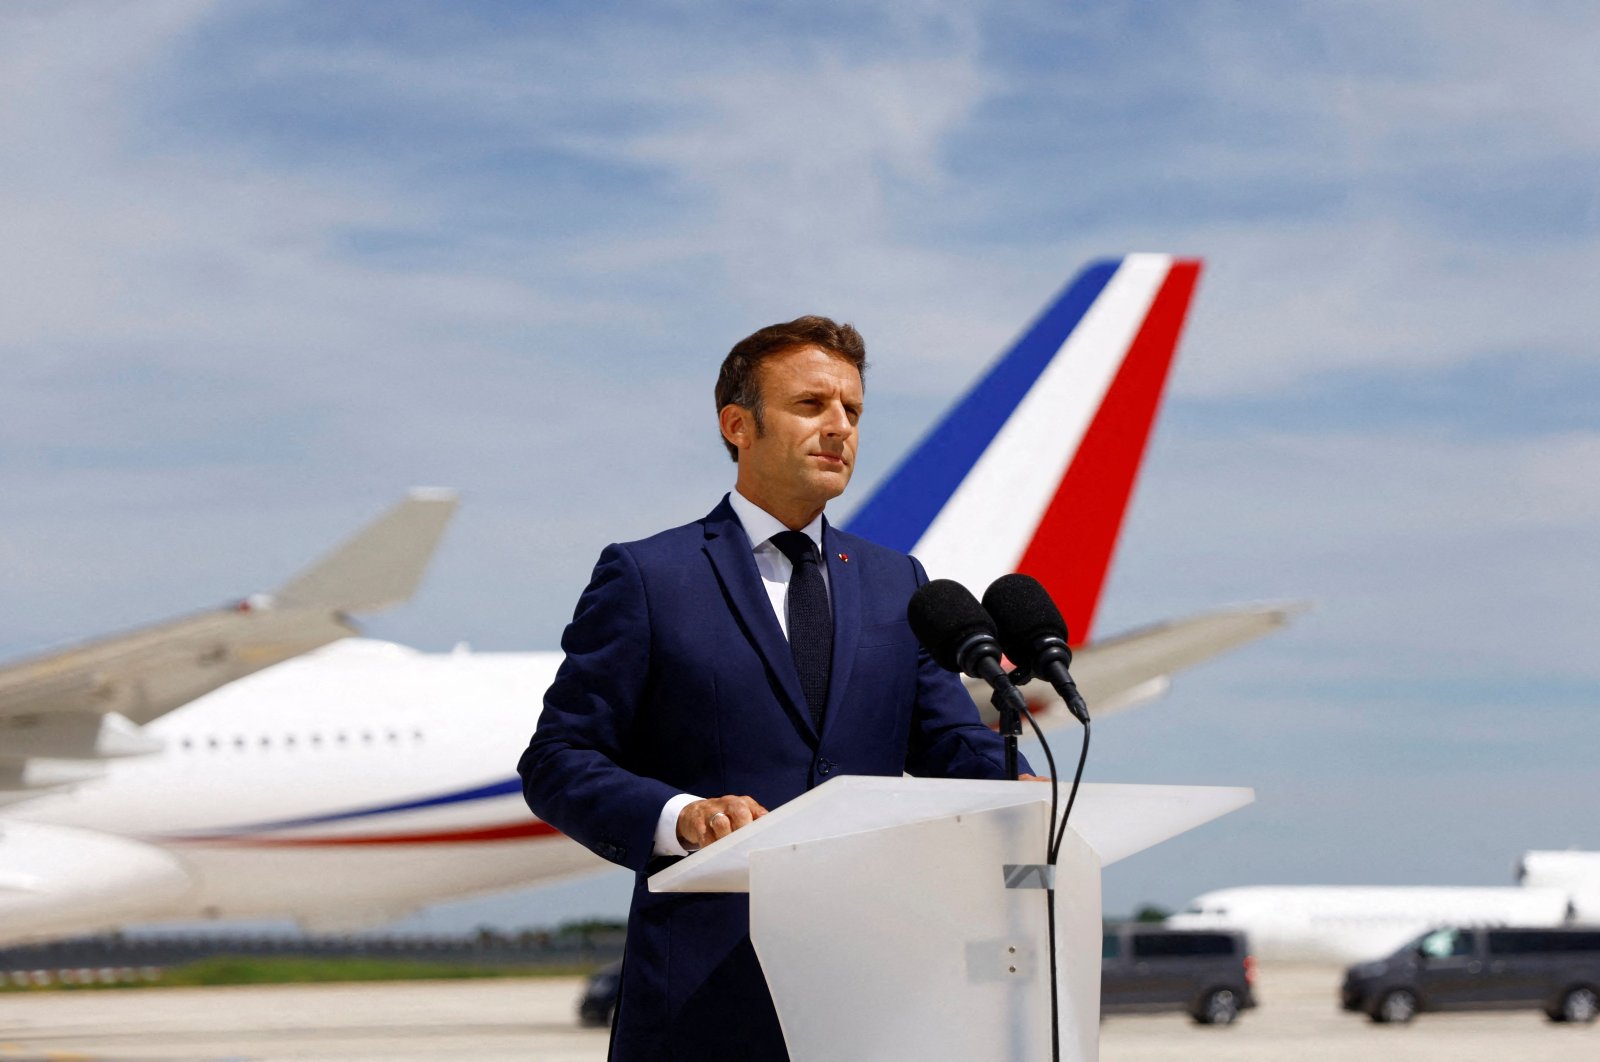 French President Emmanuel Macron delivers a statement on the tarmac before his departure to visit French NATO troops in Romania, at Paris-Orly Airport, Orly, France, June 14, 2022. (AFP Photo)